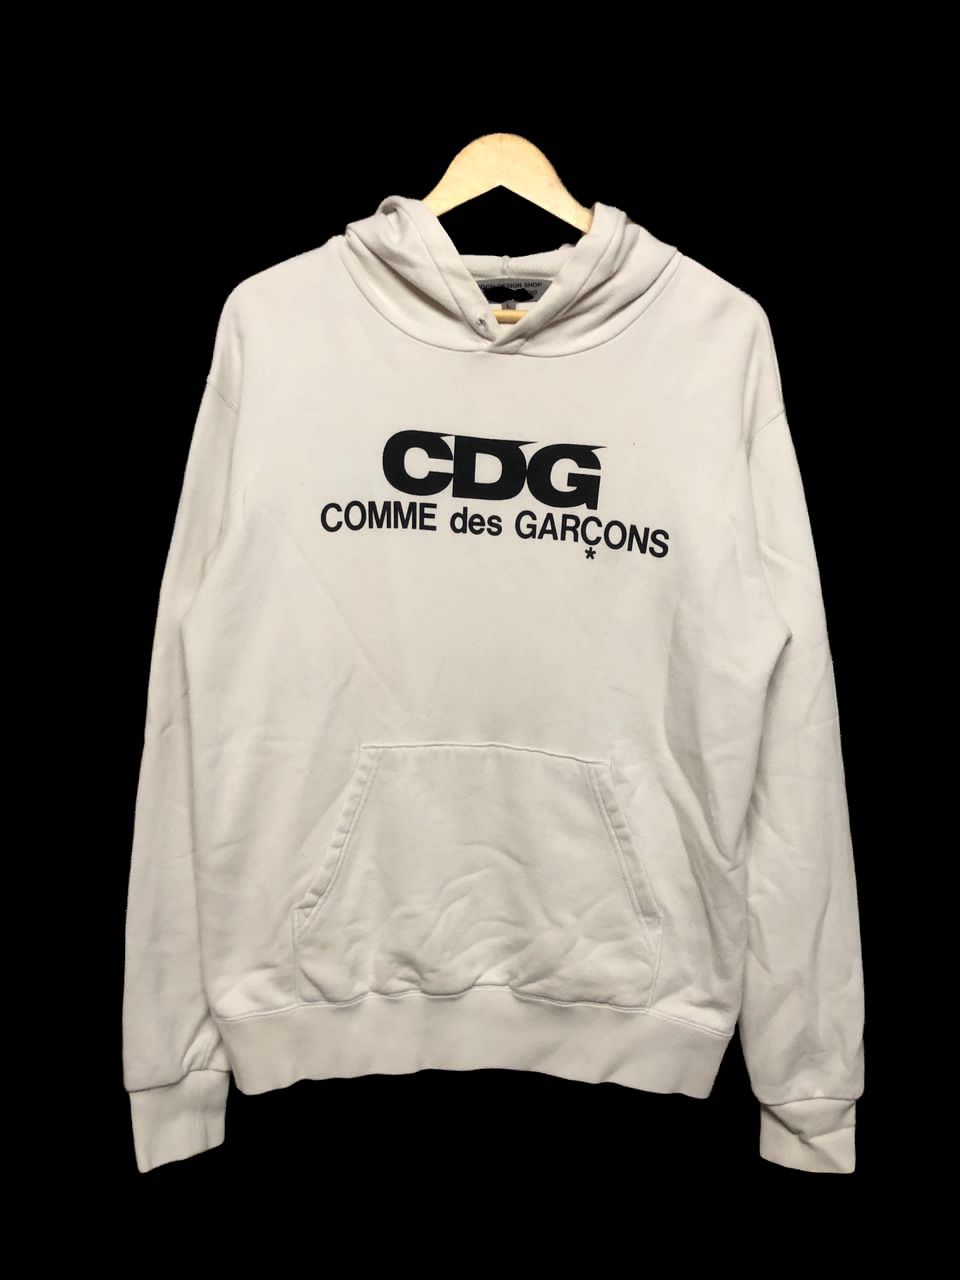 AD2016🔥Cdg X Good Shop Design Spellout Pullover Hoodies - 2